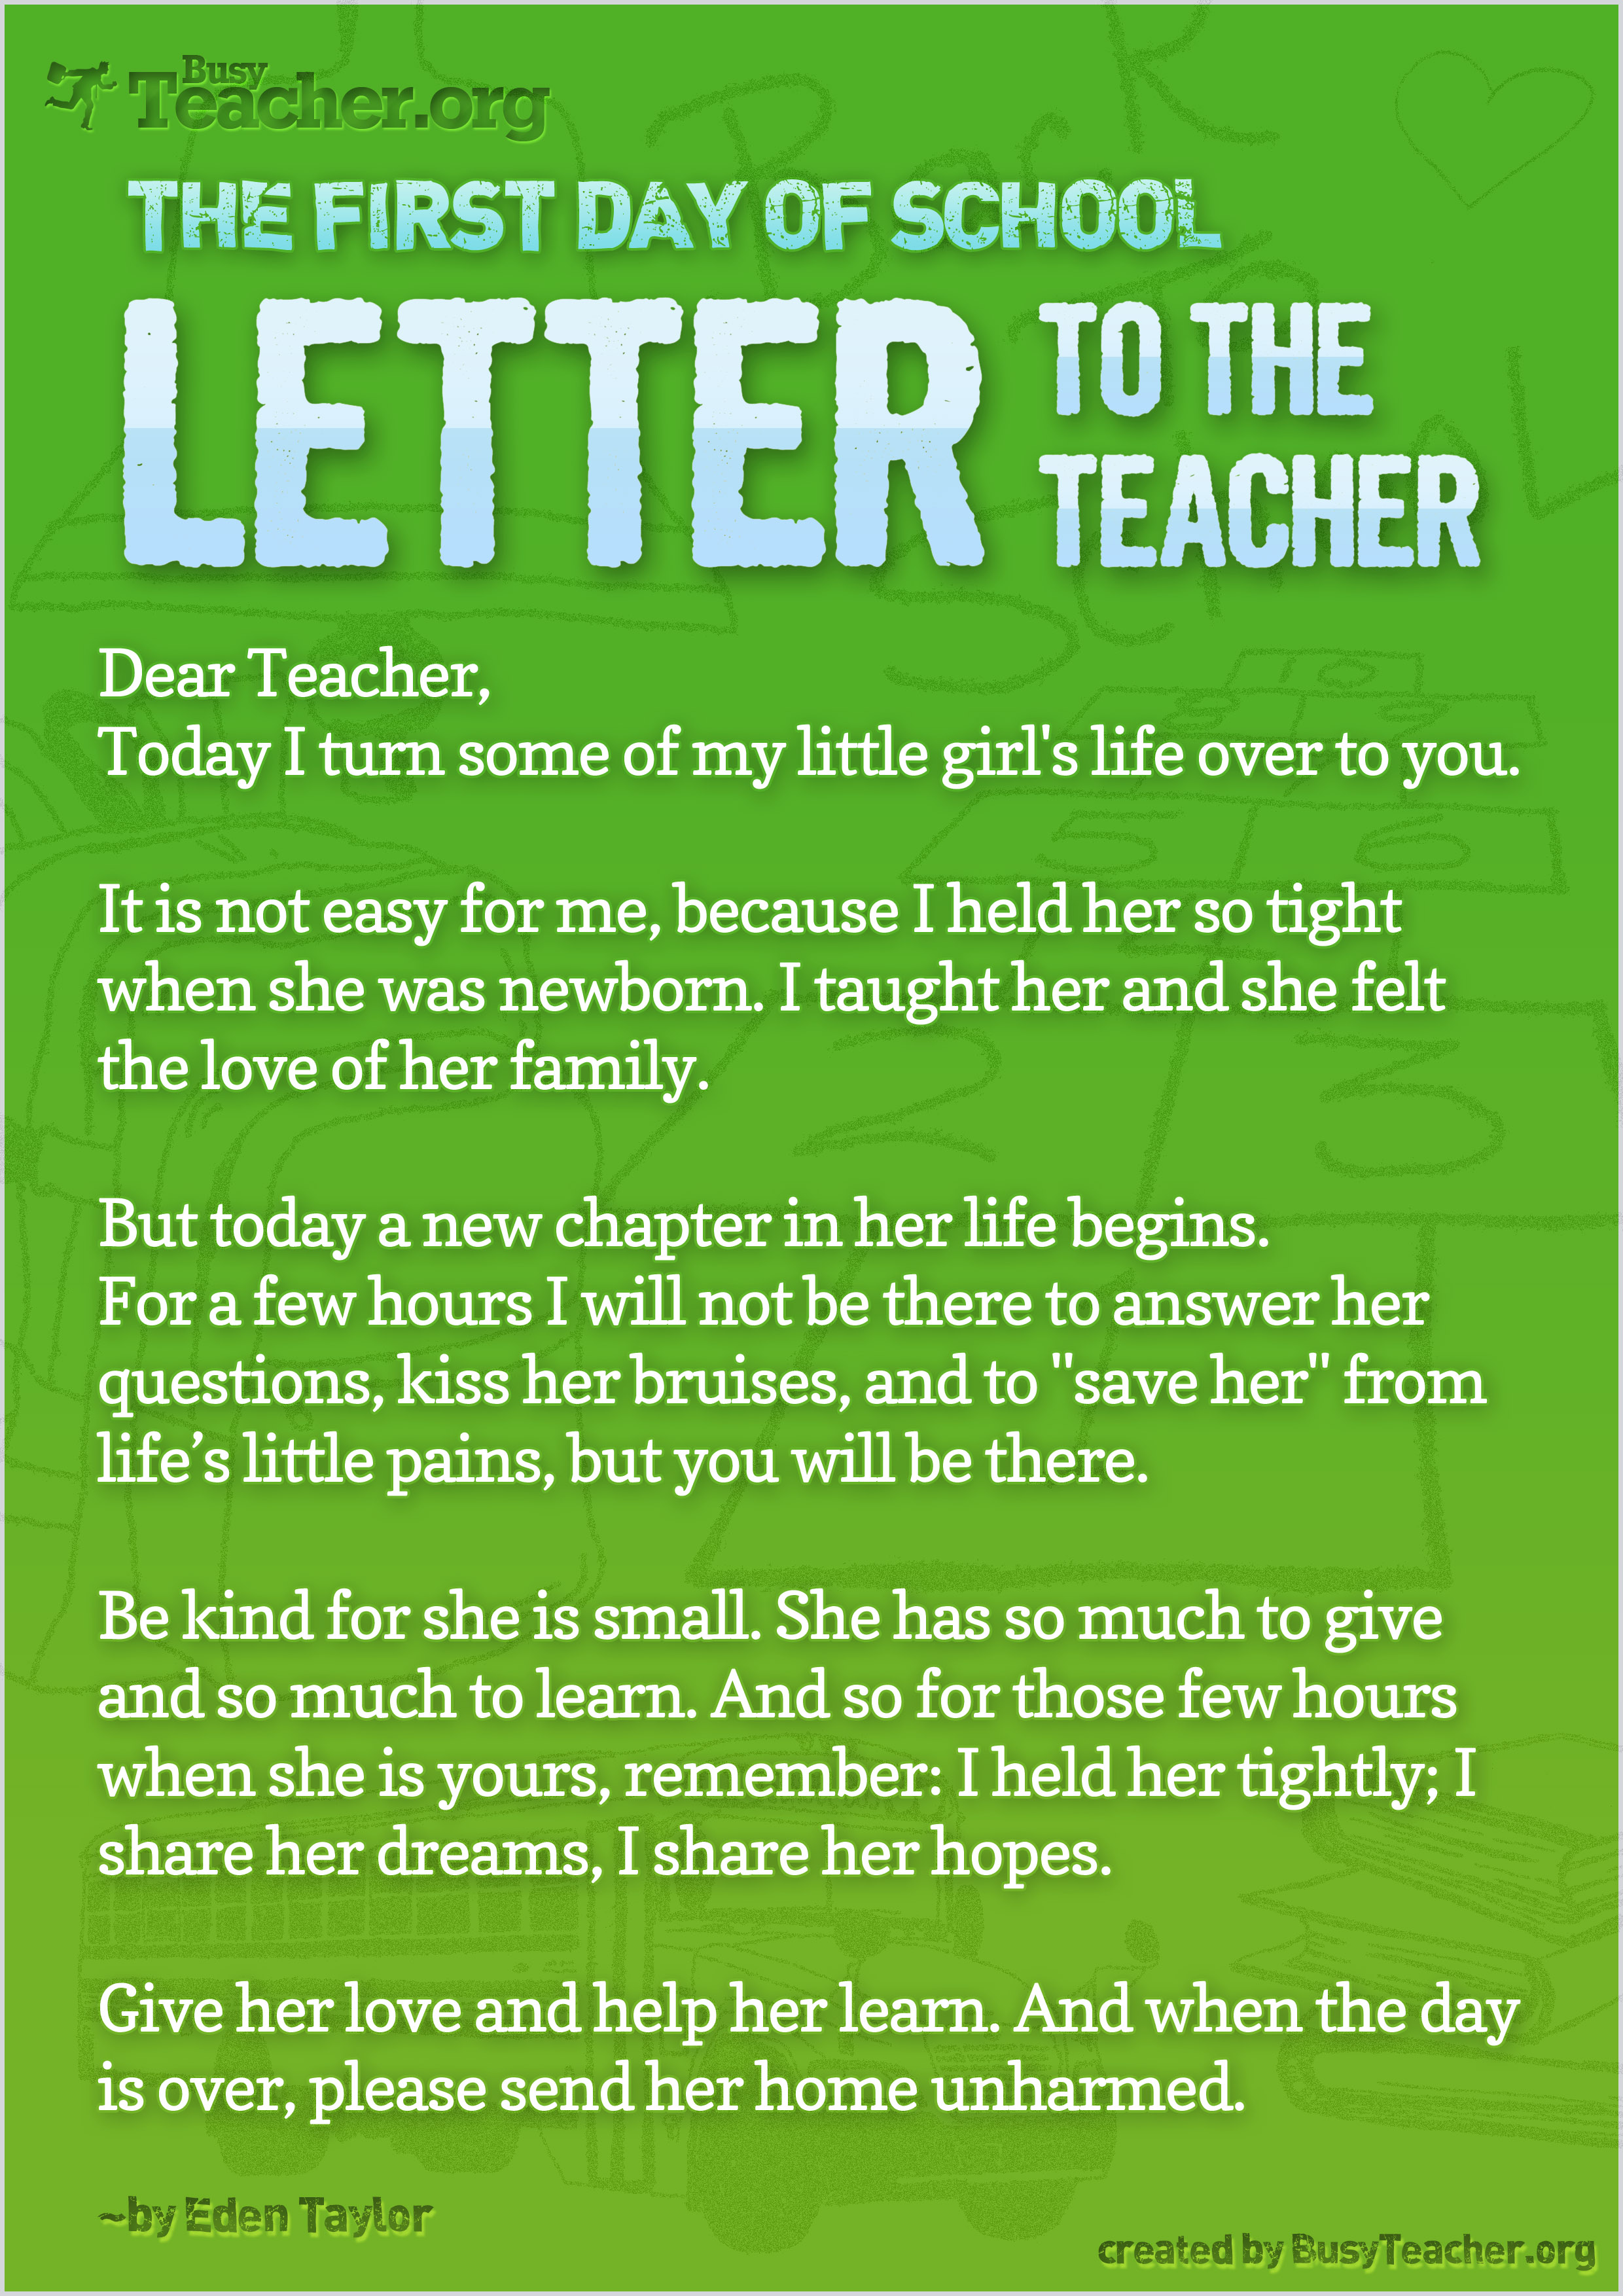 the-first-day-of-school-letter-to-the-teacher-poster